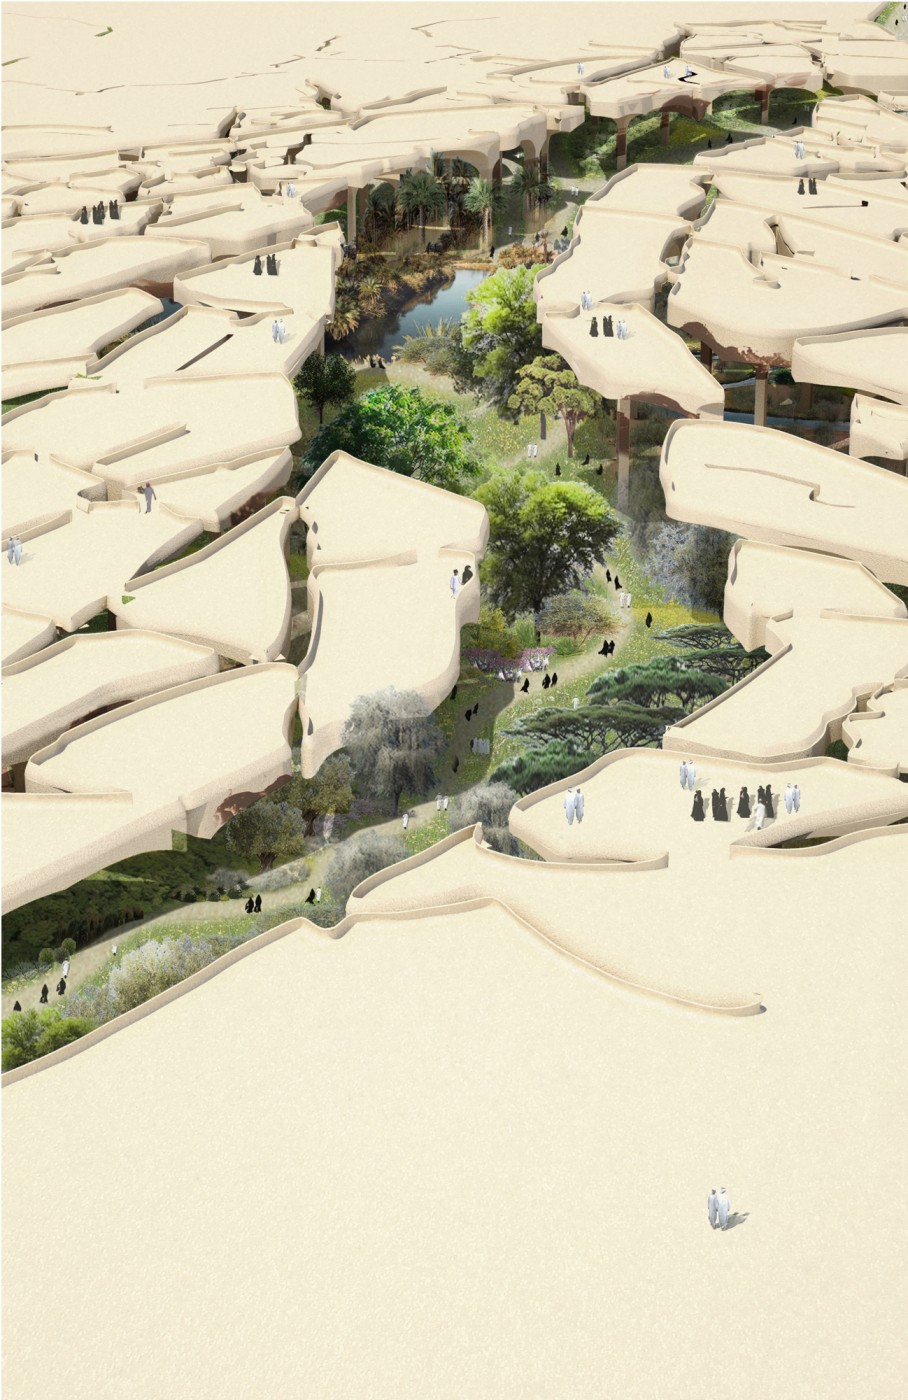 Abu Dhabi’s New Park Will Hide A 30-Acre Oasis Below The Desert